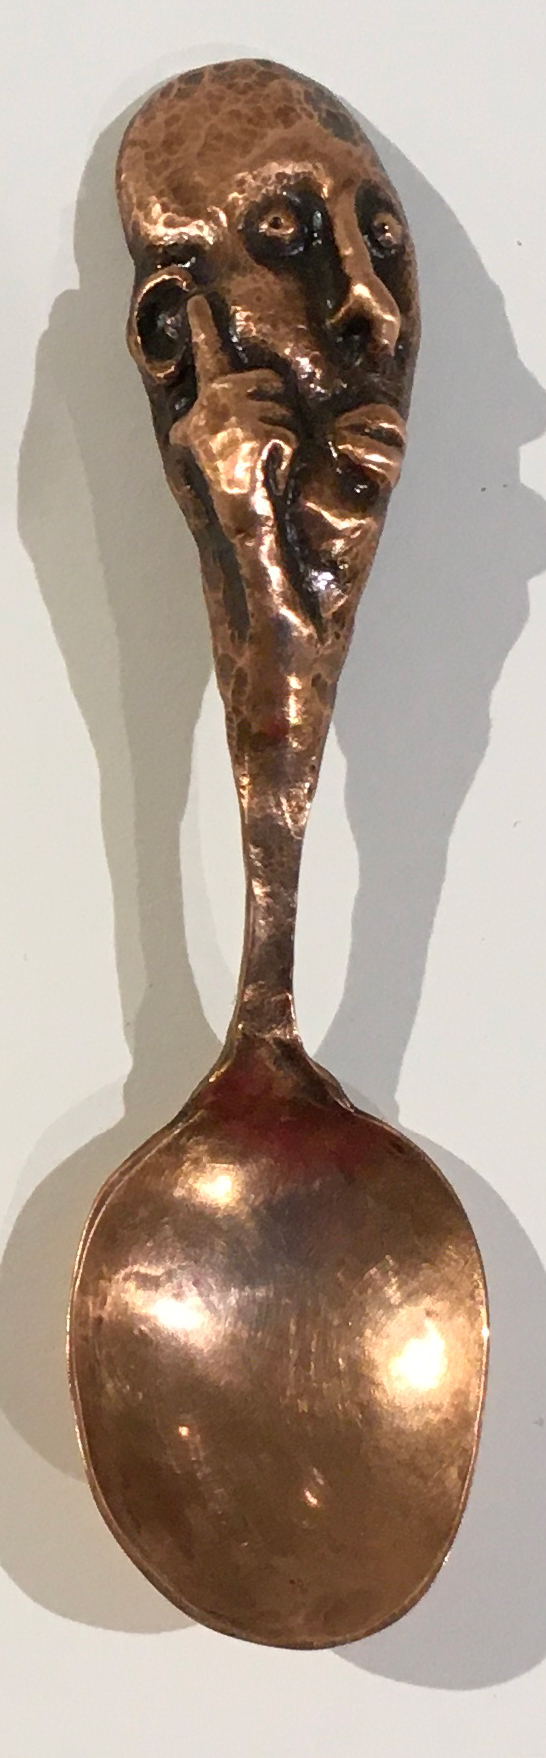 Linda Kelen, Half-Listening, 2018, copper, 5.75 inches, collection of the artist